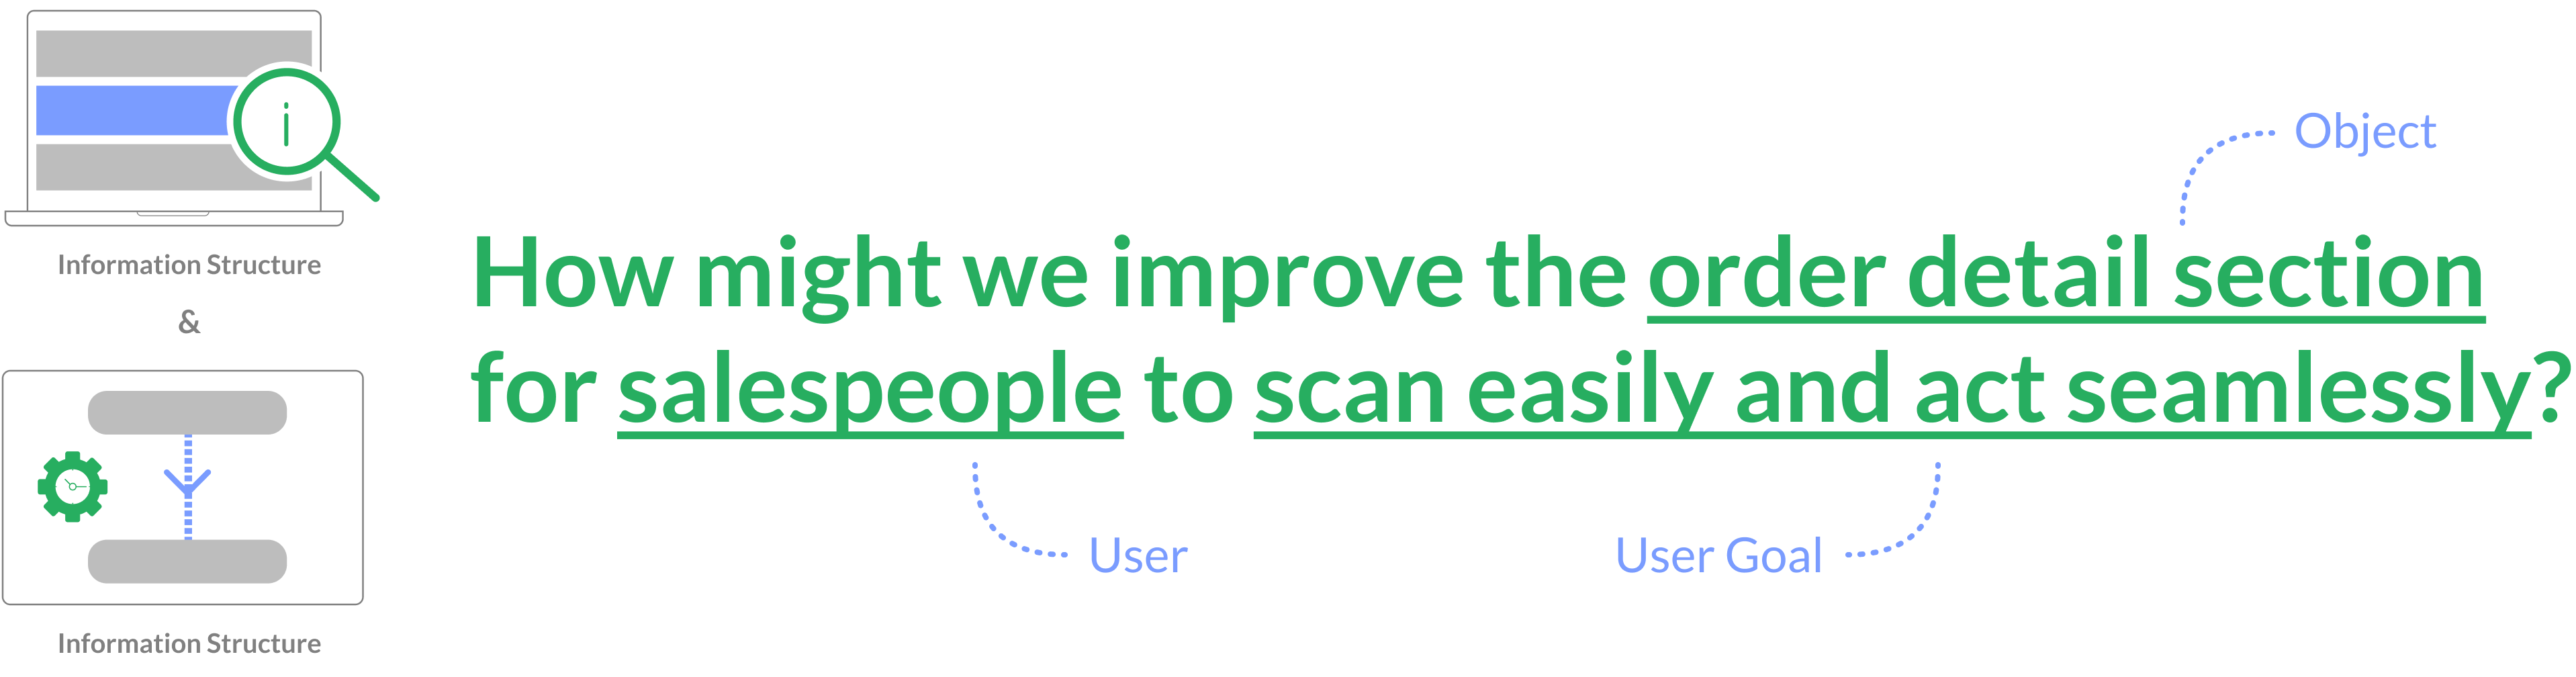 How might we improve the Order Detail section for salespeople to scan easily and act seamlessly?